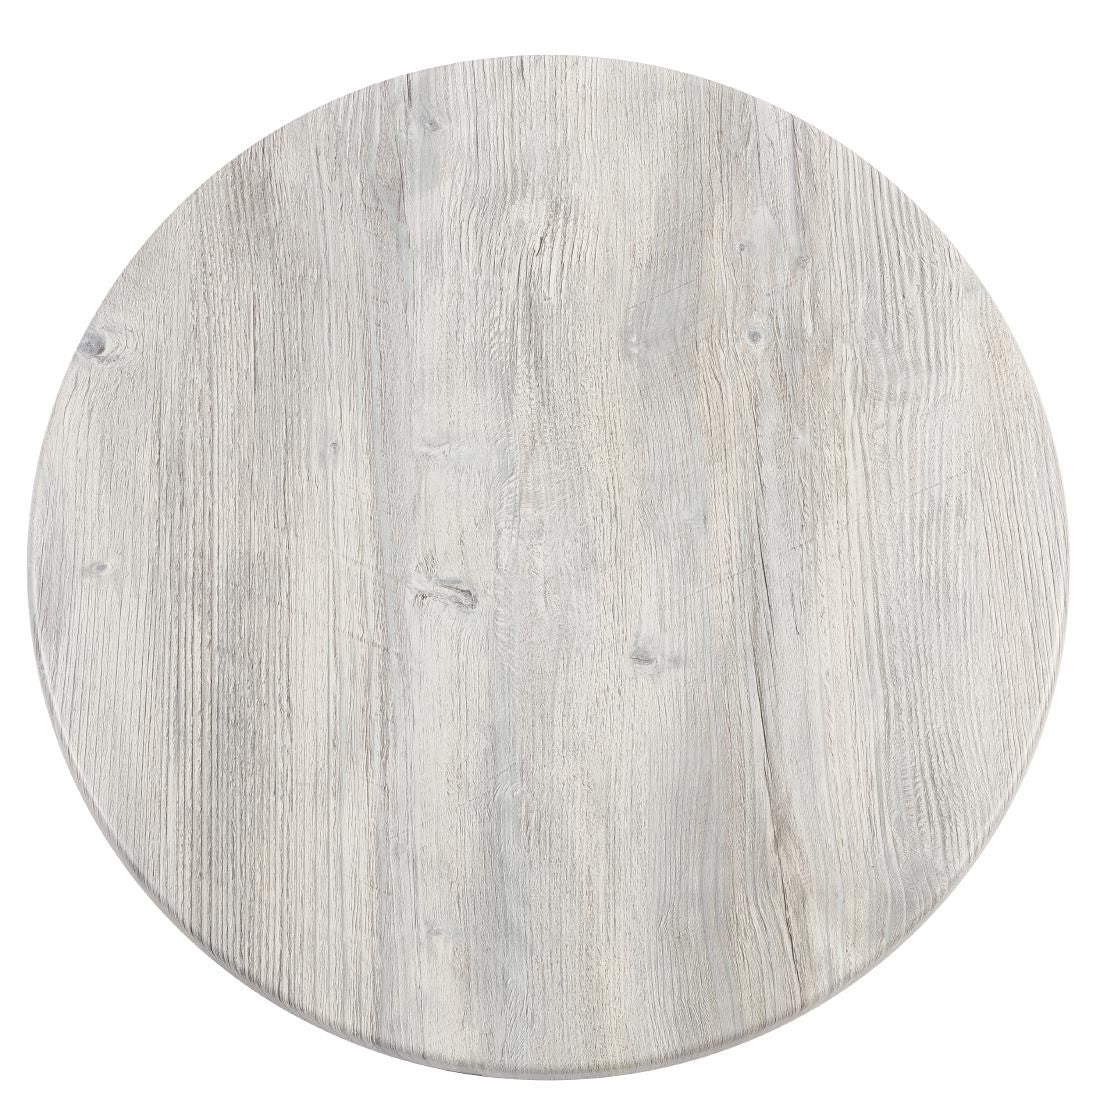 Werzalit Pre-drilled Table Top  Ponderosa White